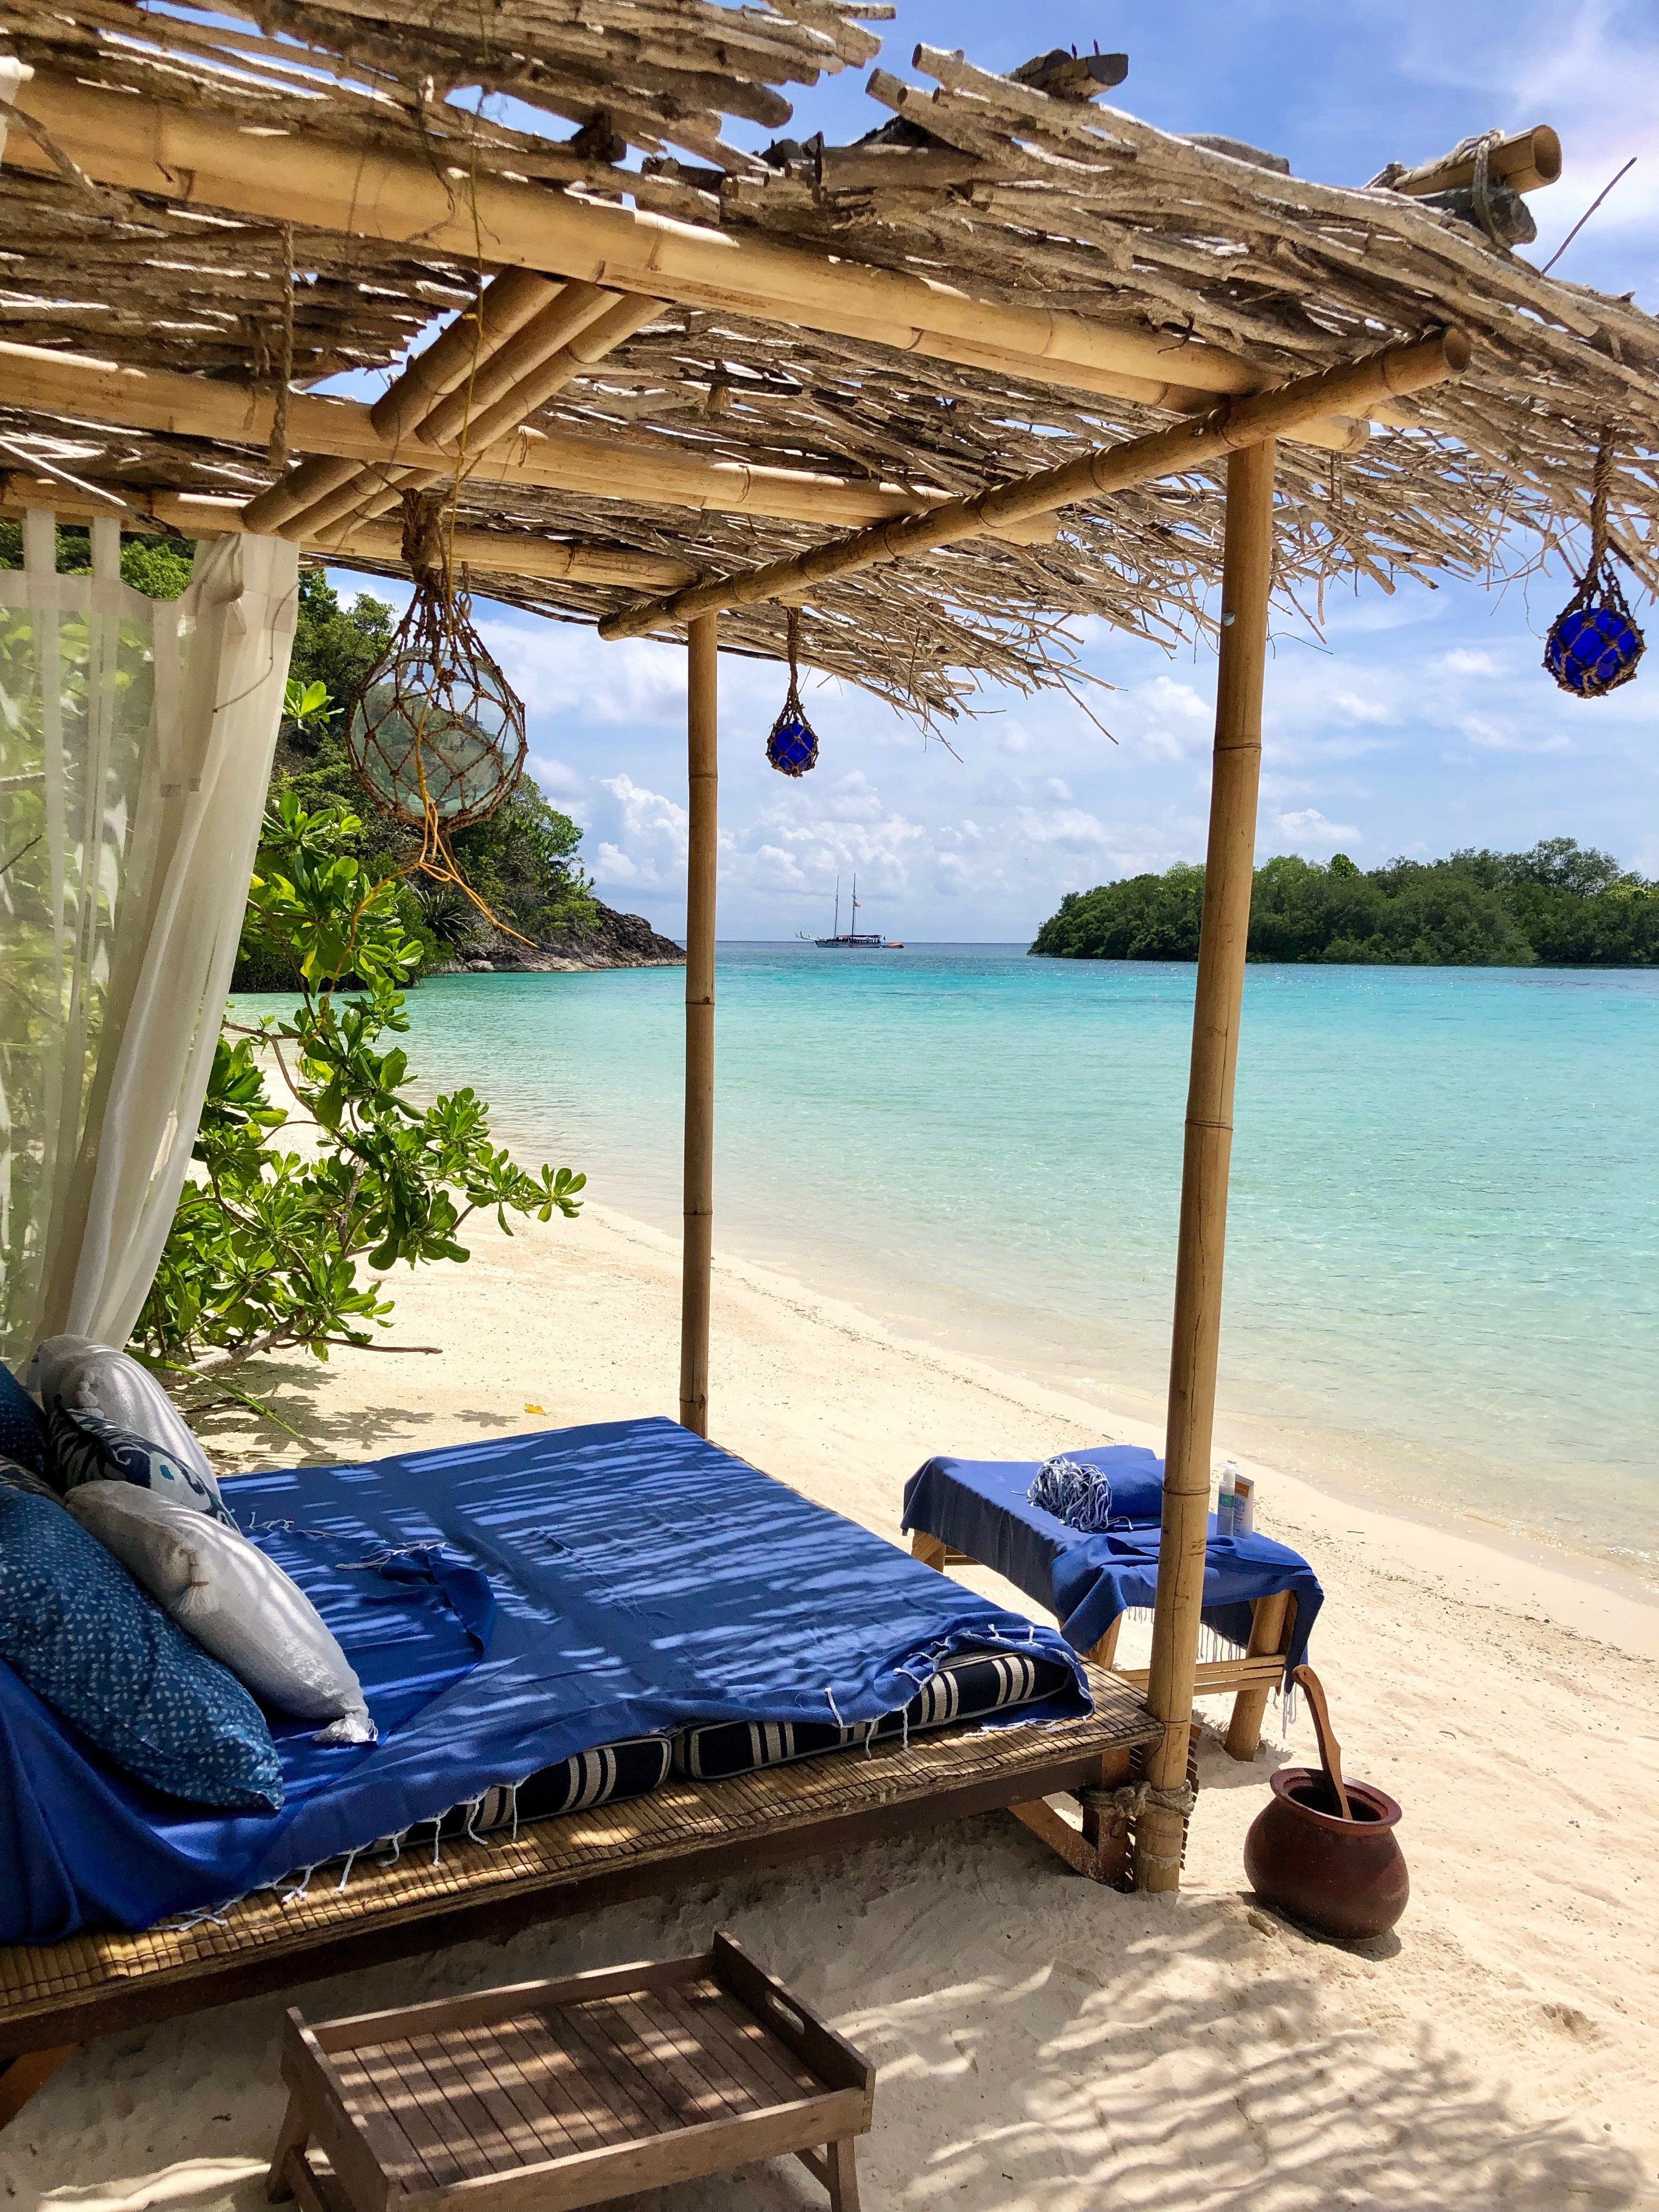 add some elements of surprise to your honeymoon like a picnic on a private island beach